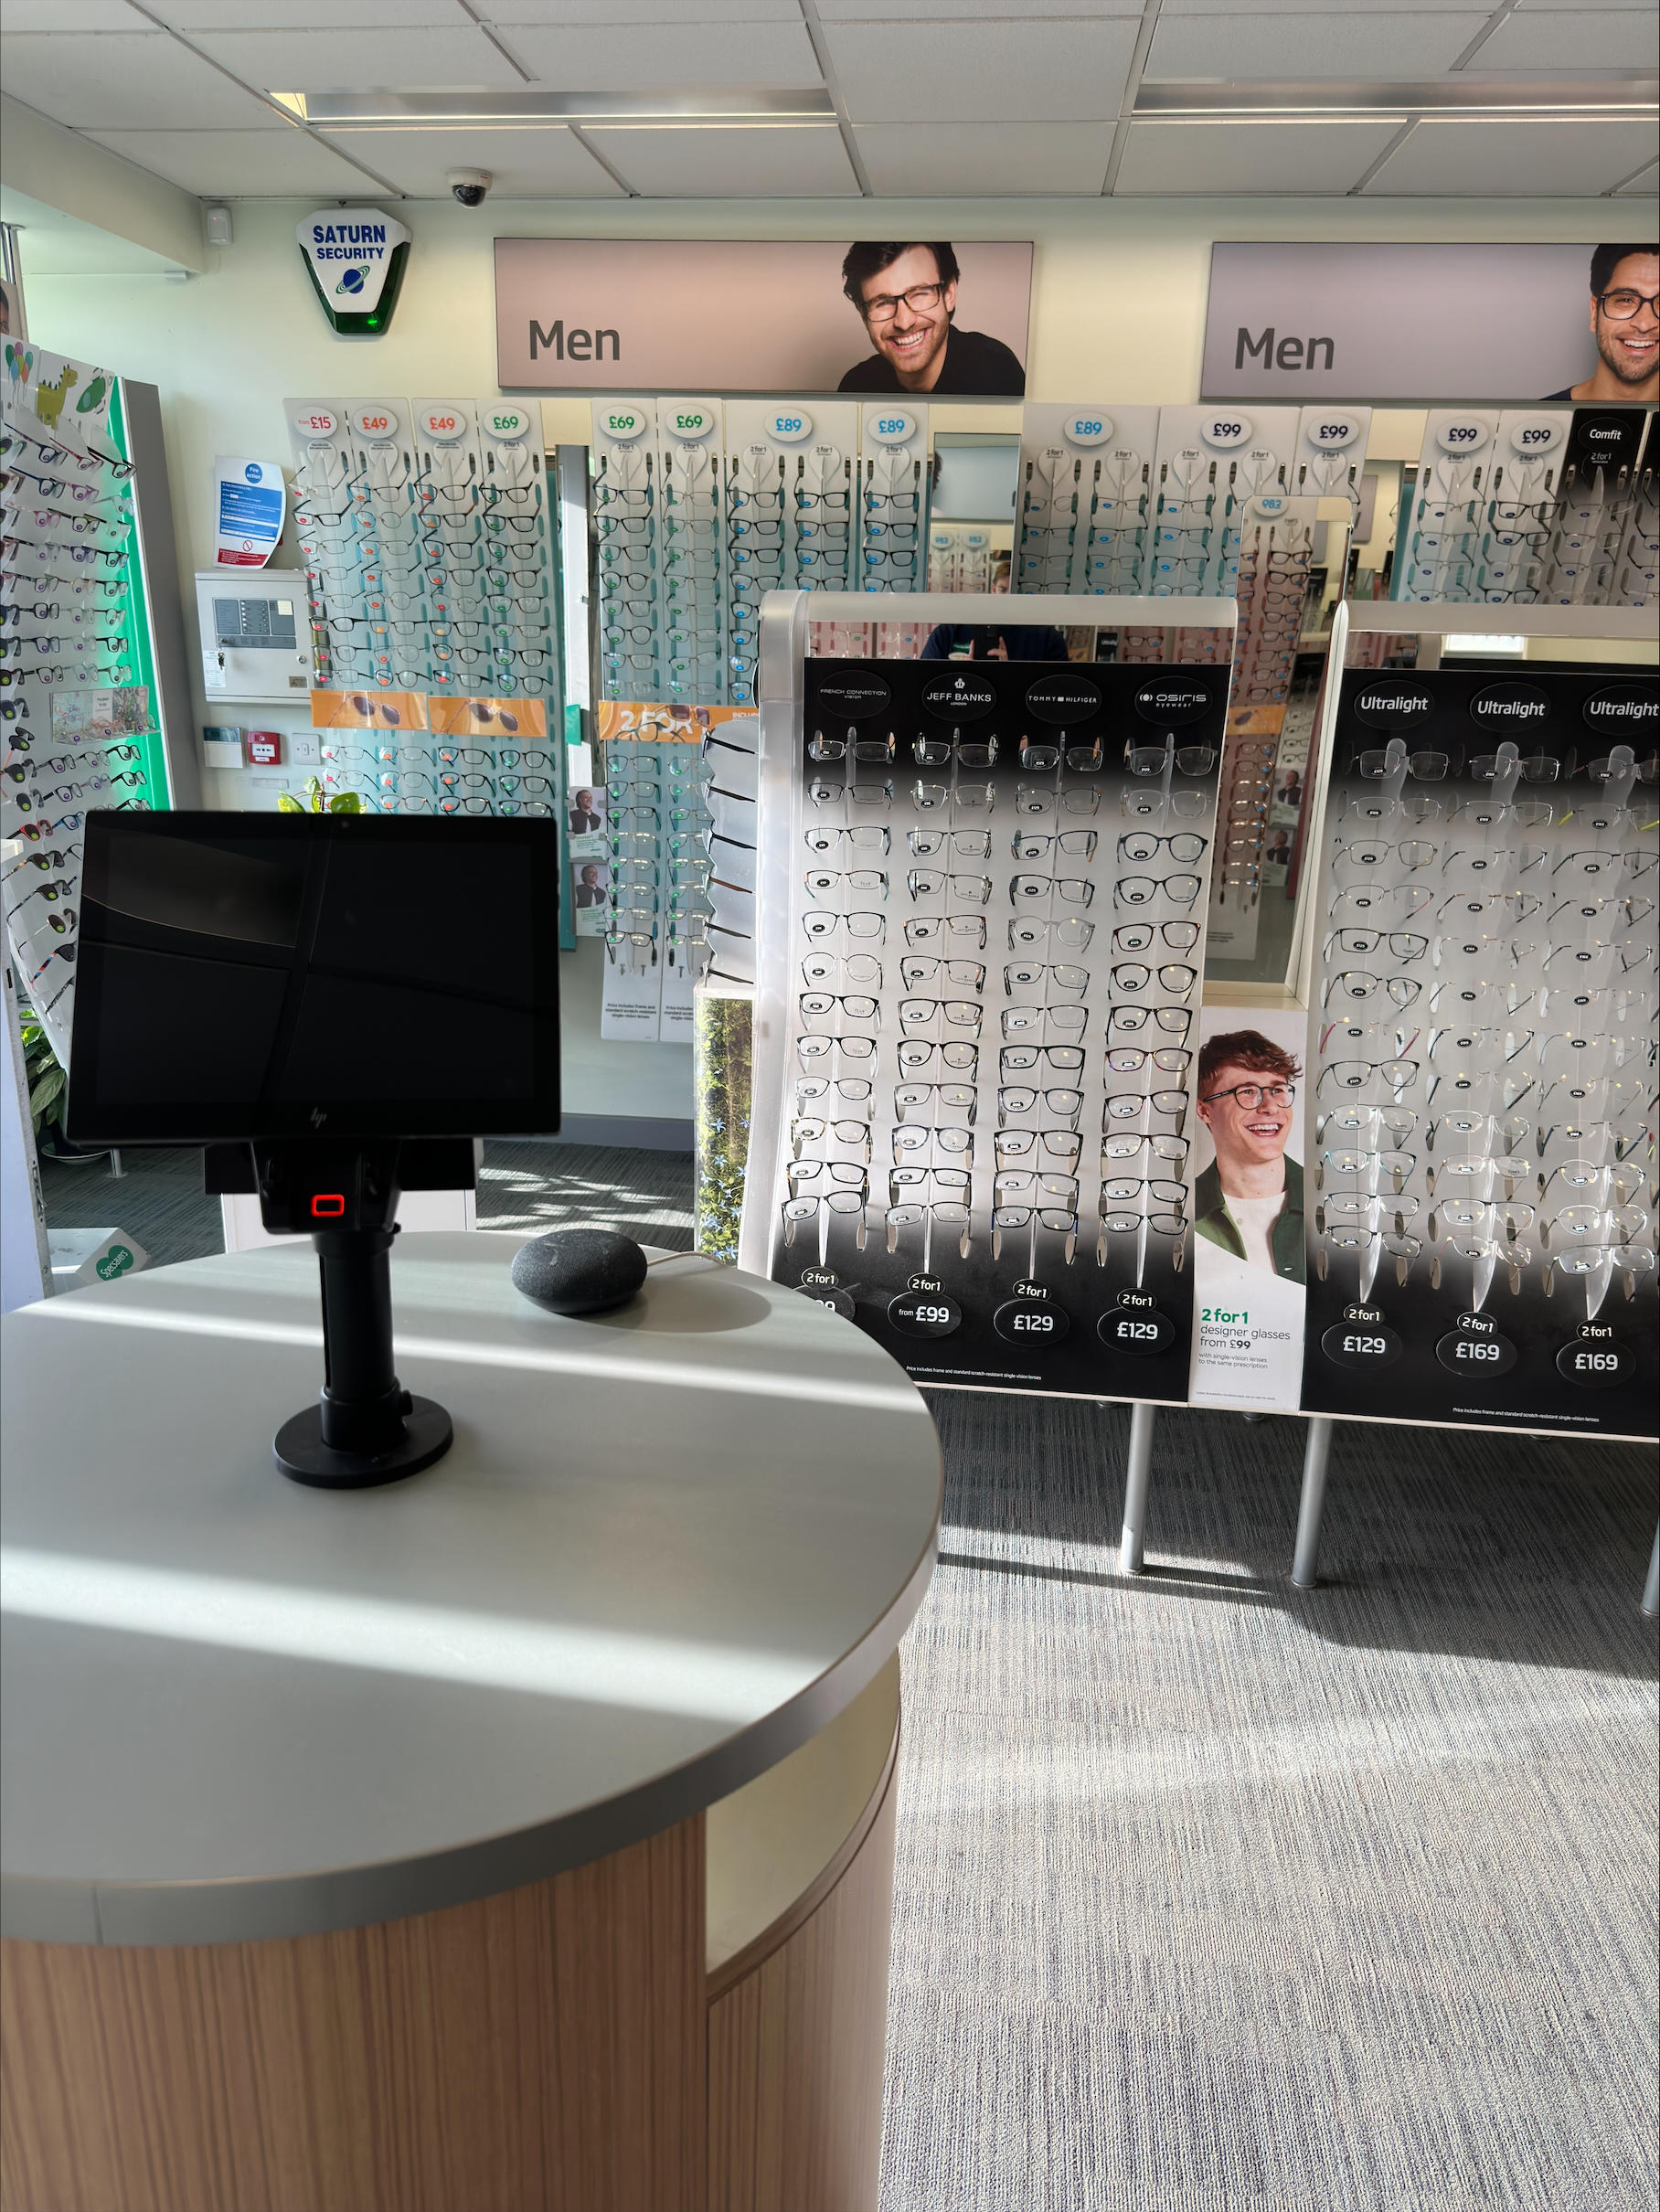 Images Specsavers Opticians and Audiologists - Belle Vale